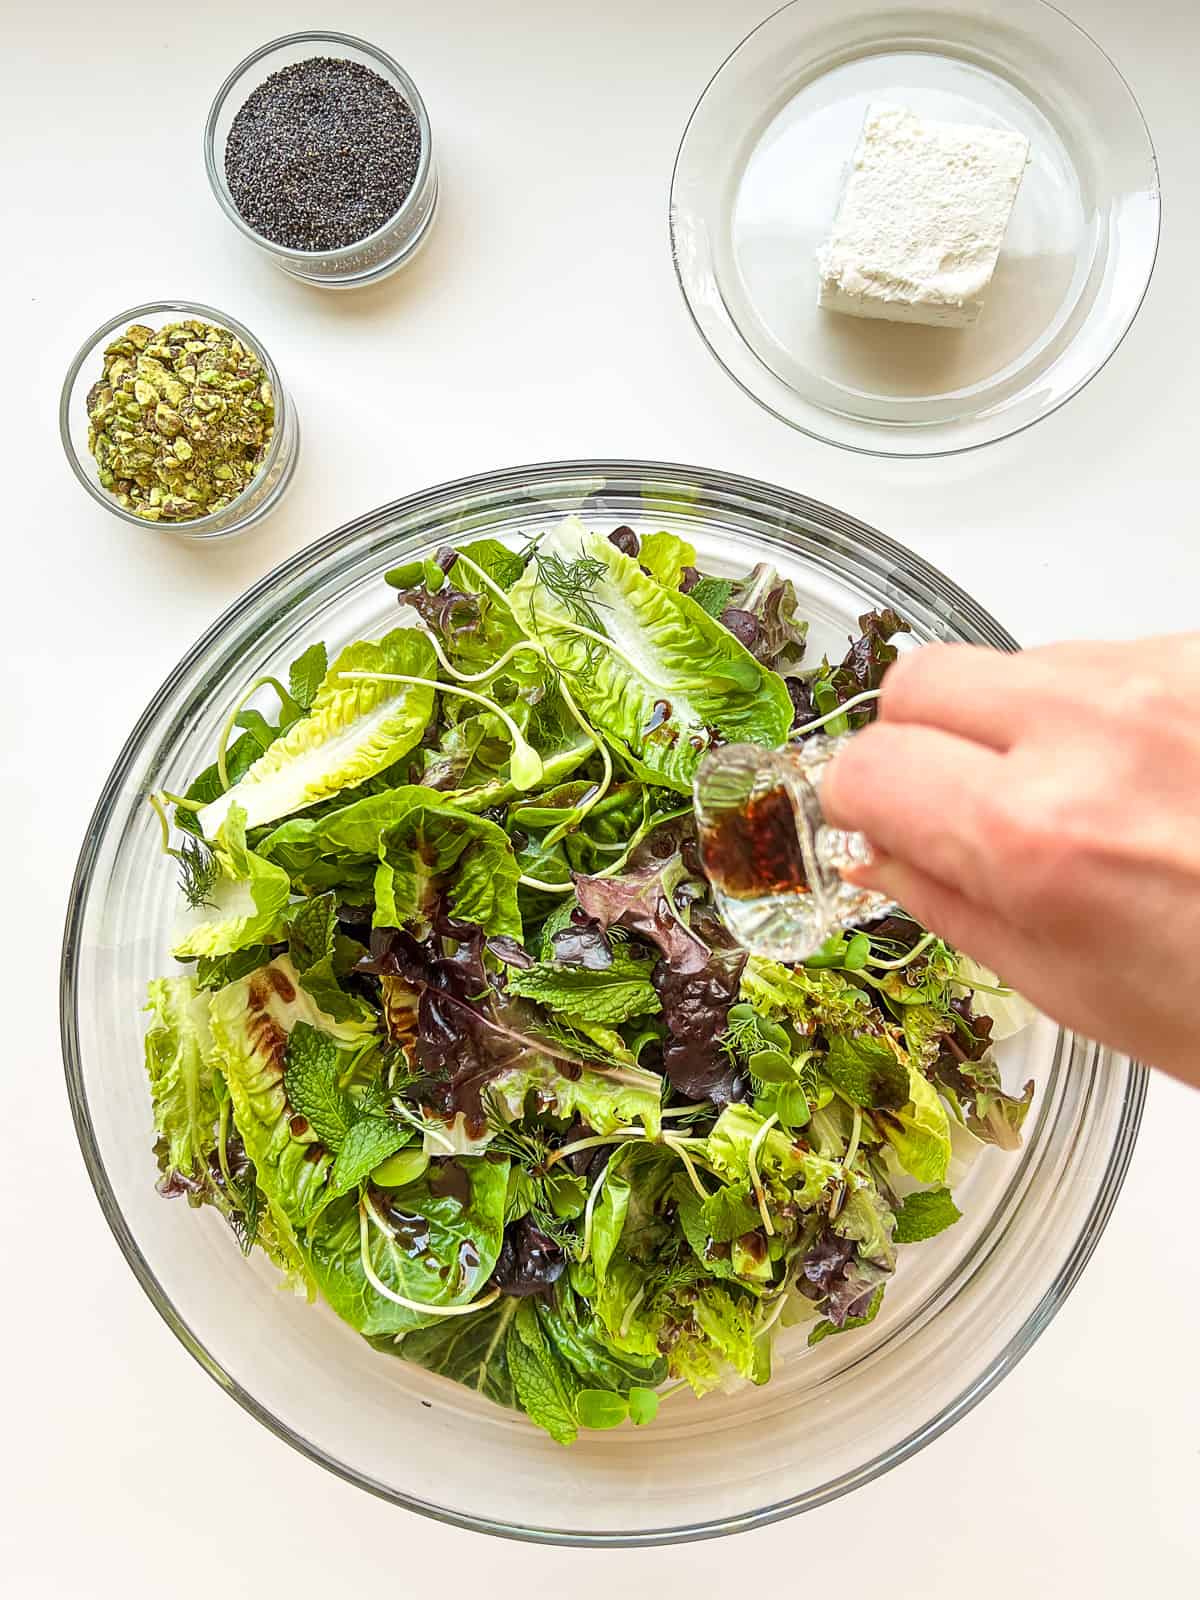 An image of a woman's hand pouring dressing over a salad.